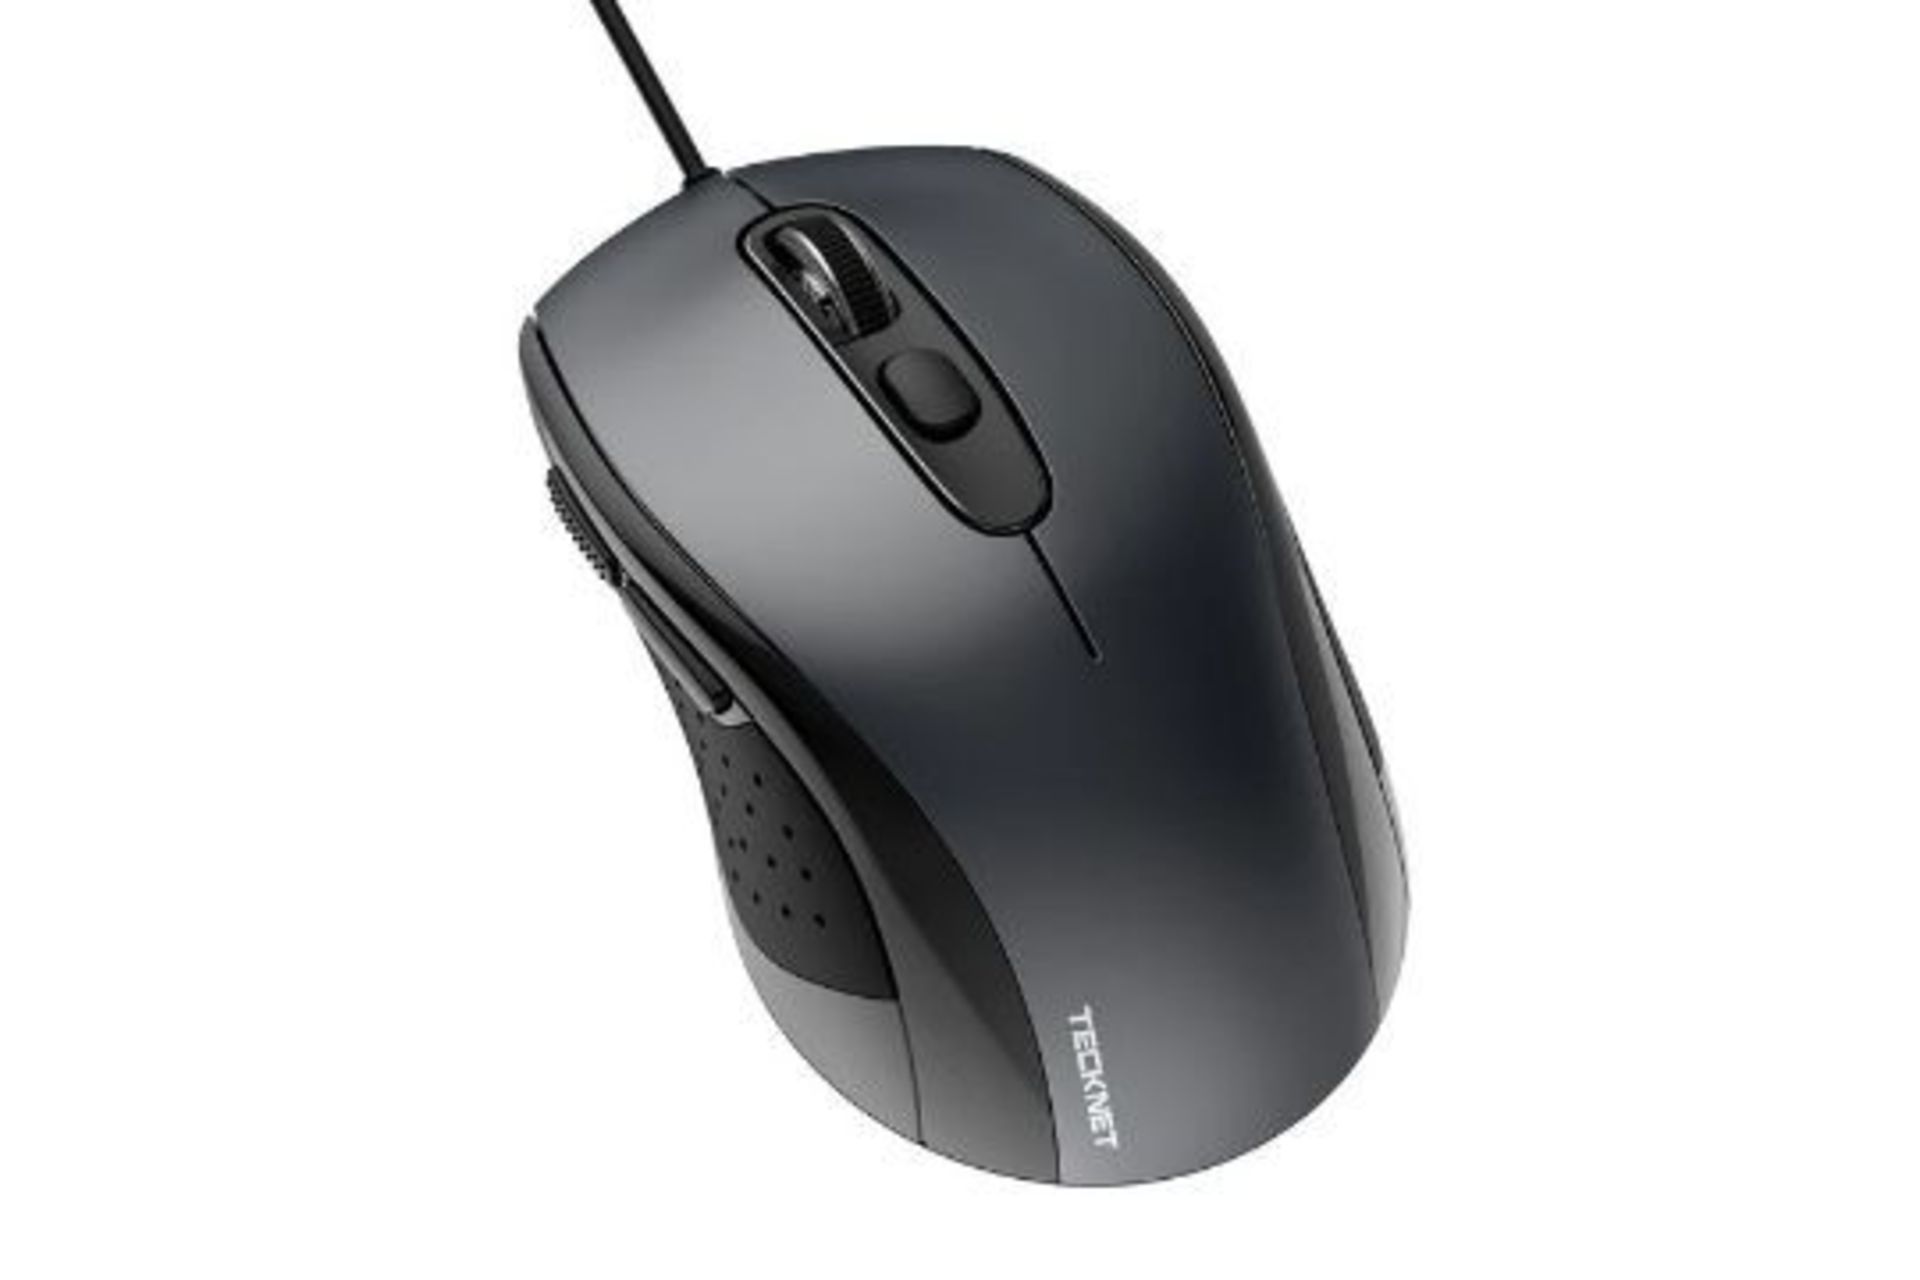 RRP £15.99 each - Two TECKNET Wired Ergonomic Mouse